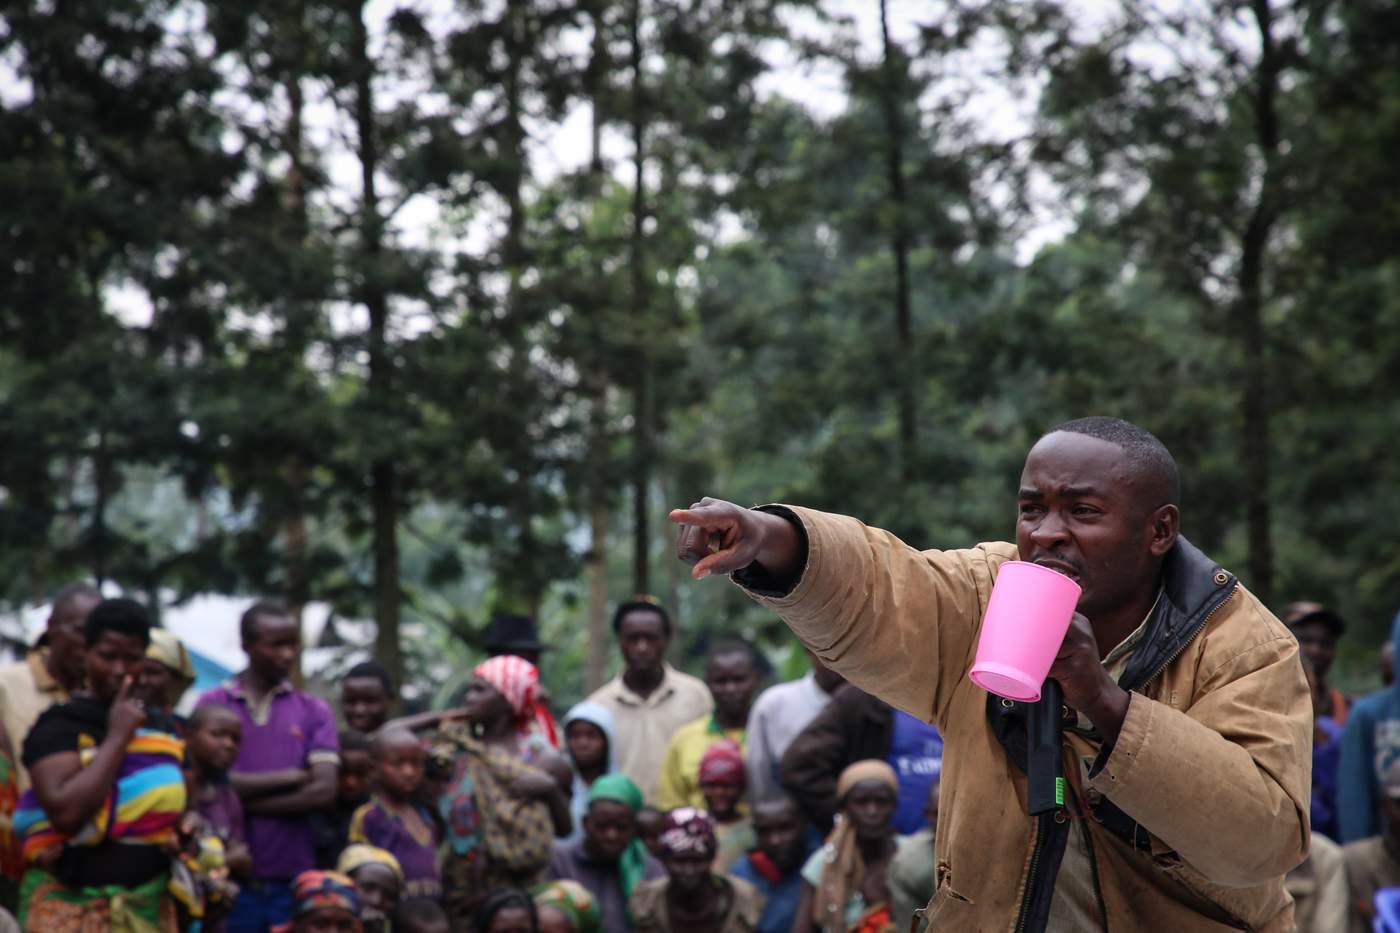 MSF health promoter Kamale Hubert plays the part of the father © Sara Creta\/MSF